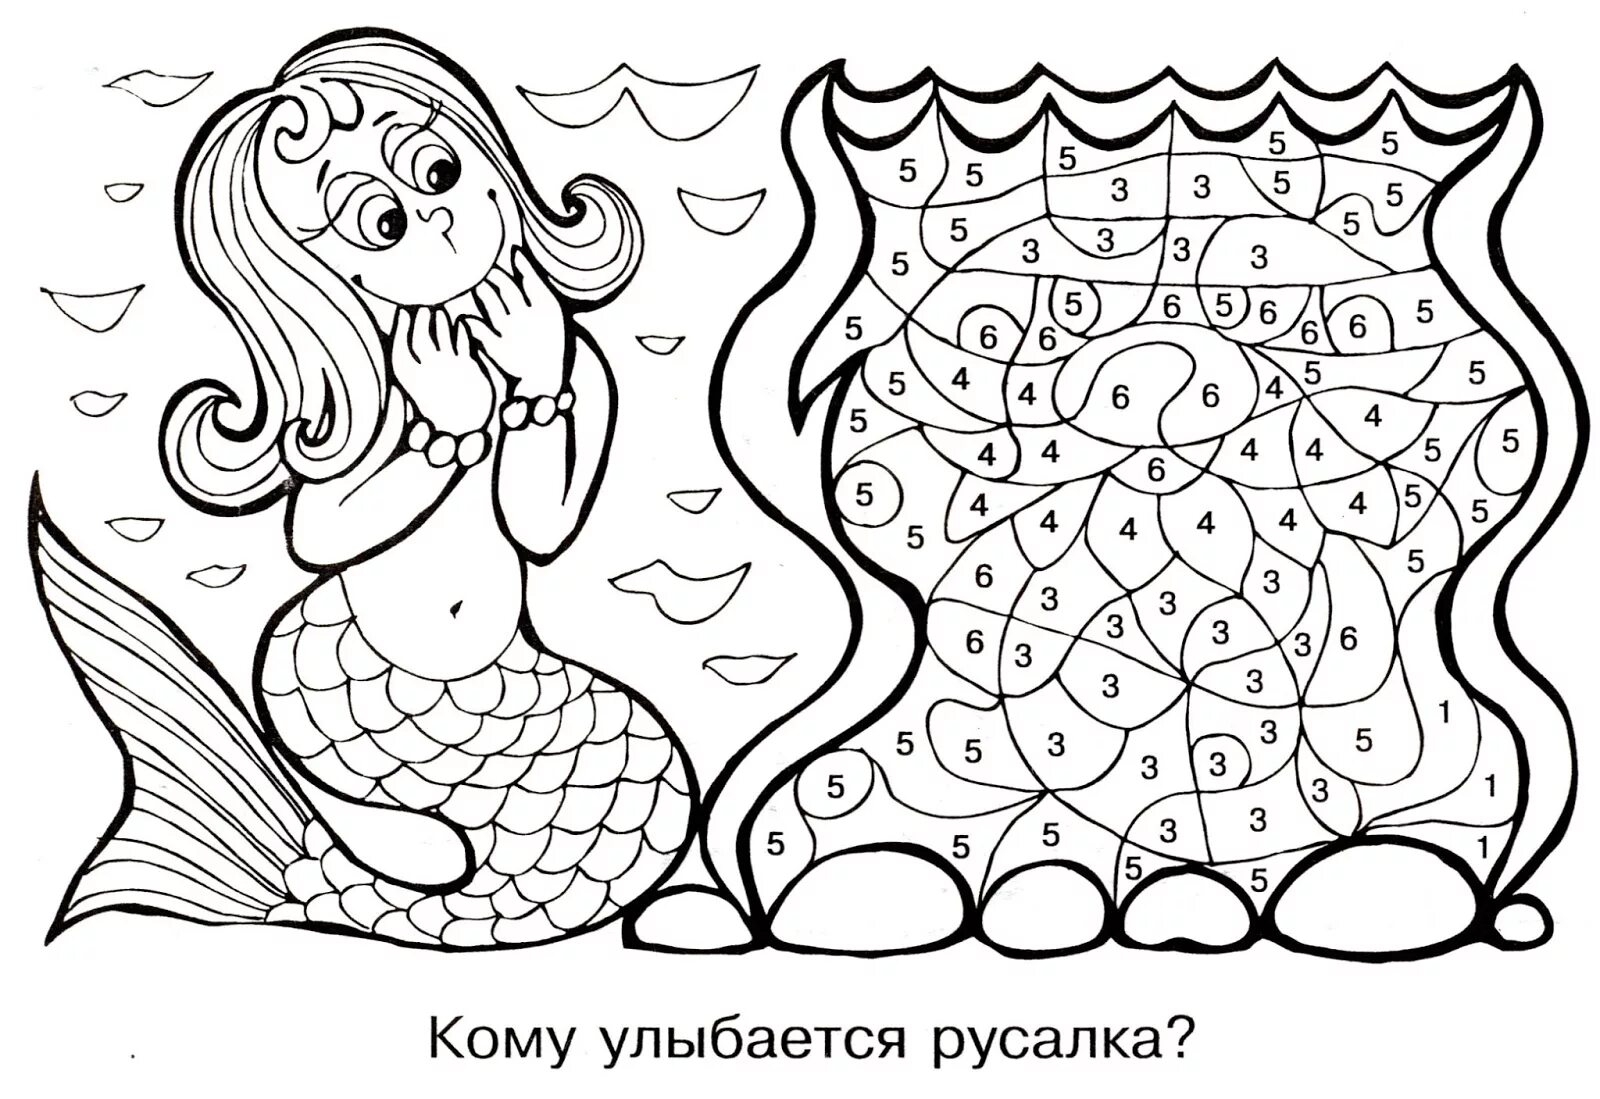 Attractive little mermaid coloring by numbers